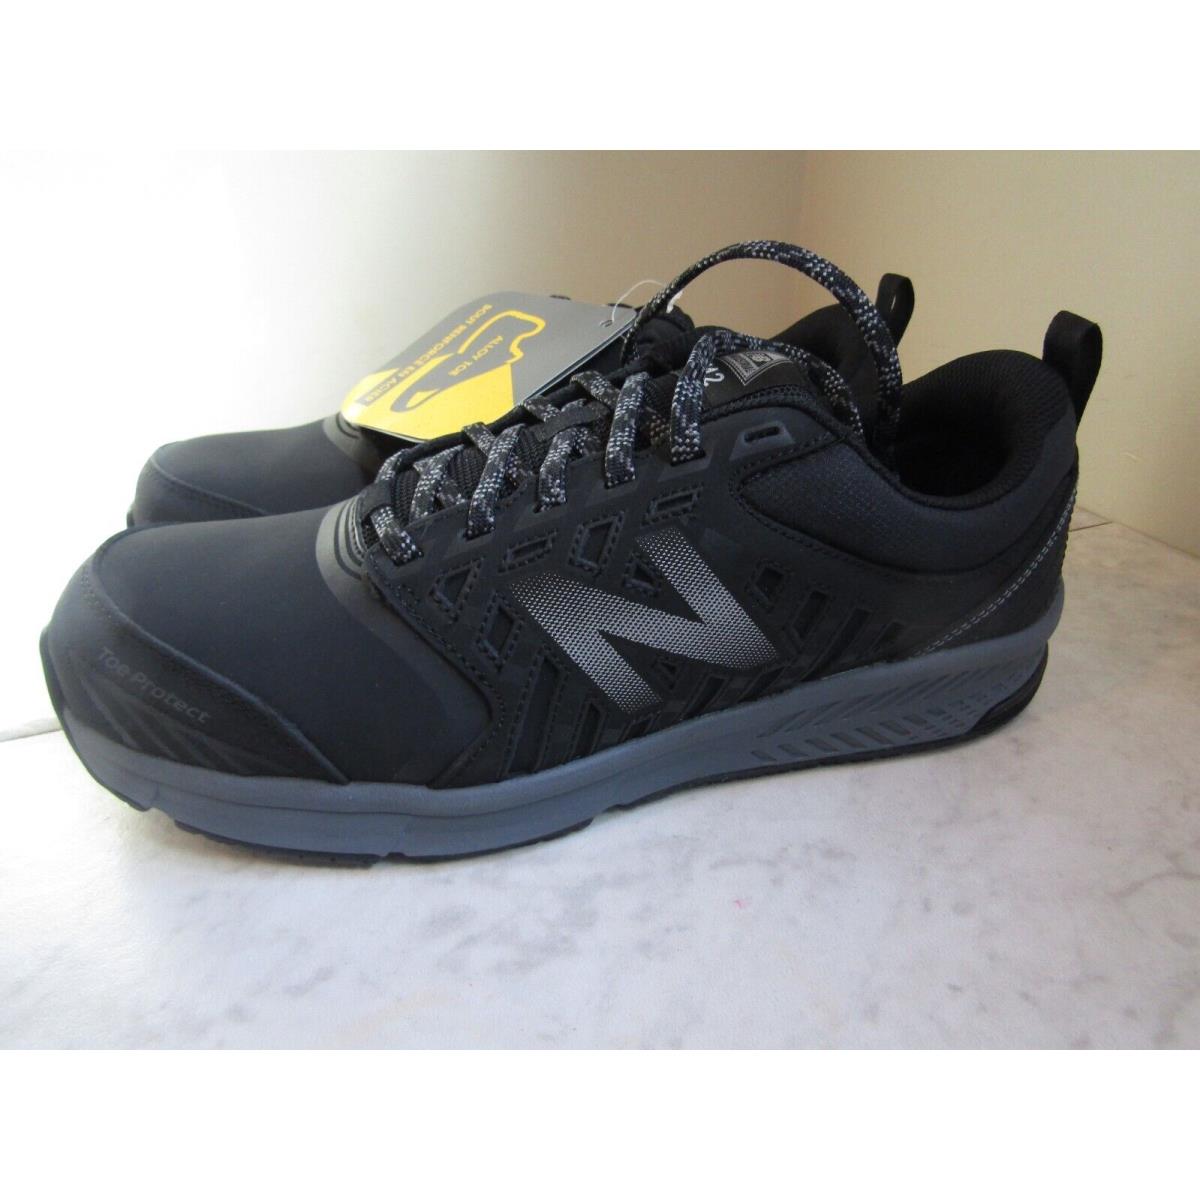 New Balance Industrial 412 Work Travail Black/gray Men`s Shoes Sneakers 10.5